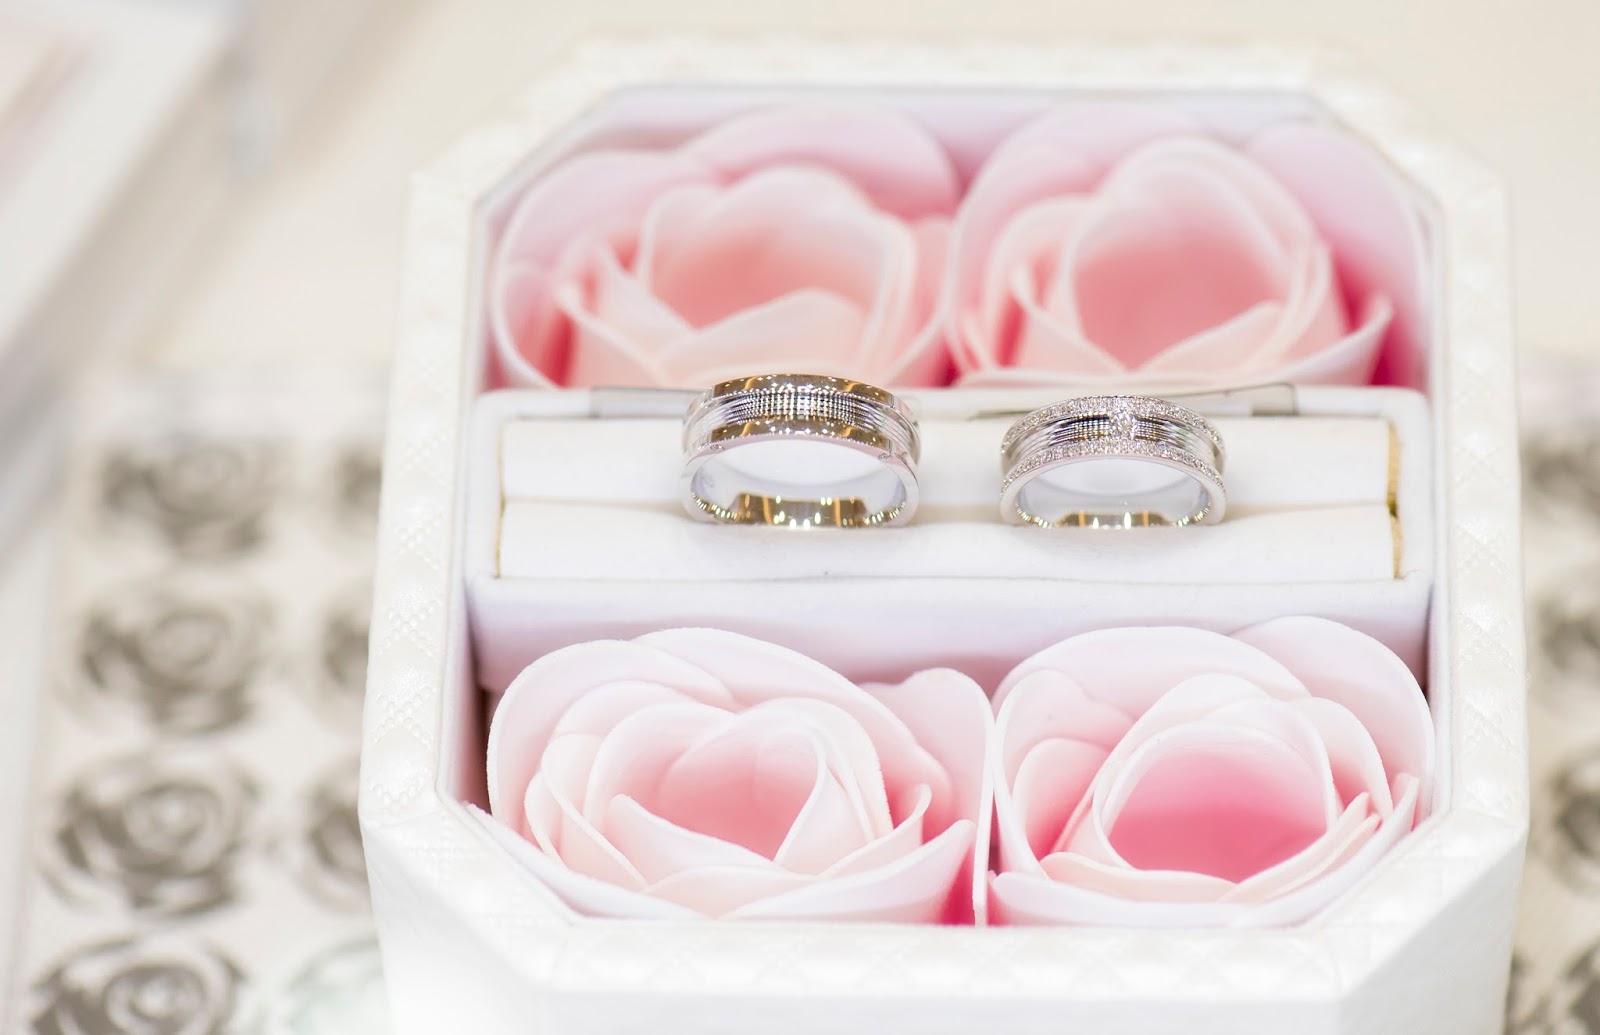 love and co wedding ring price